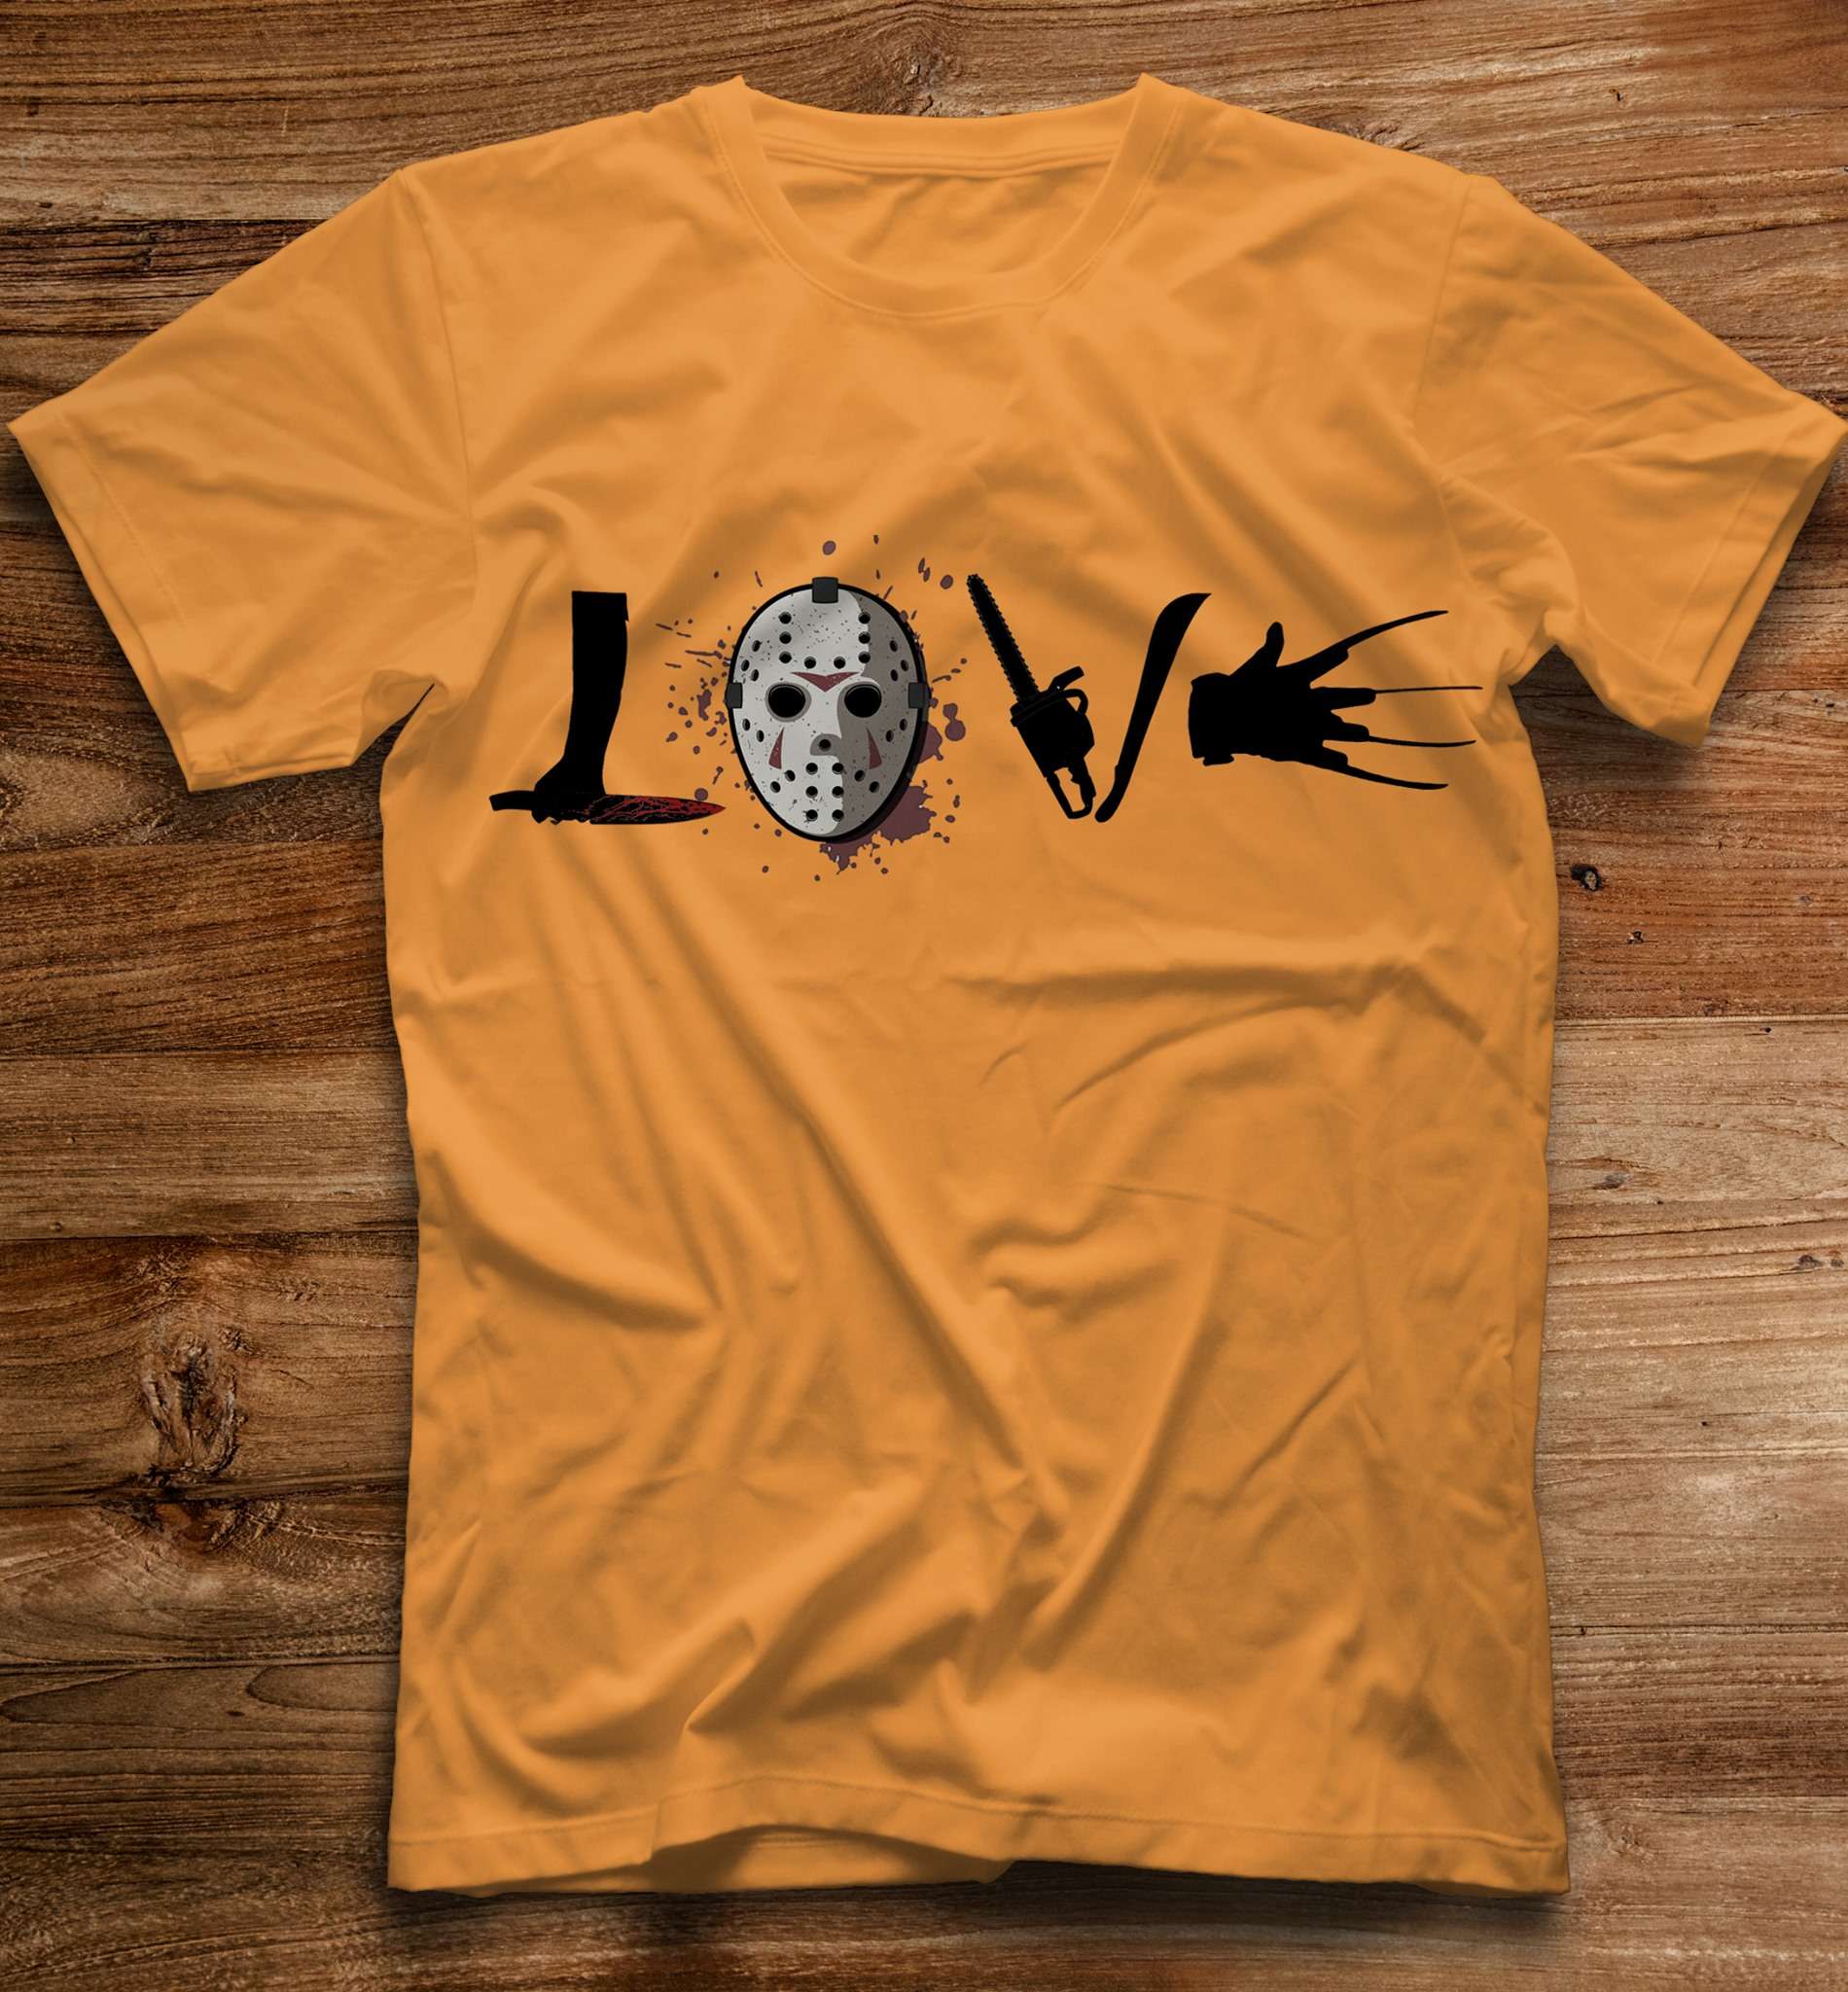 Love - Jason Voorhees, Friday the 13th, Horror movie for Halloween